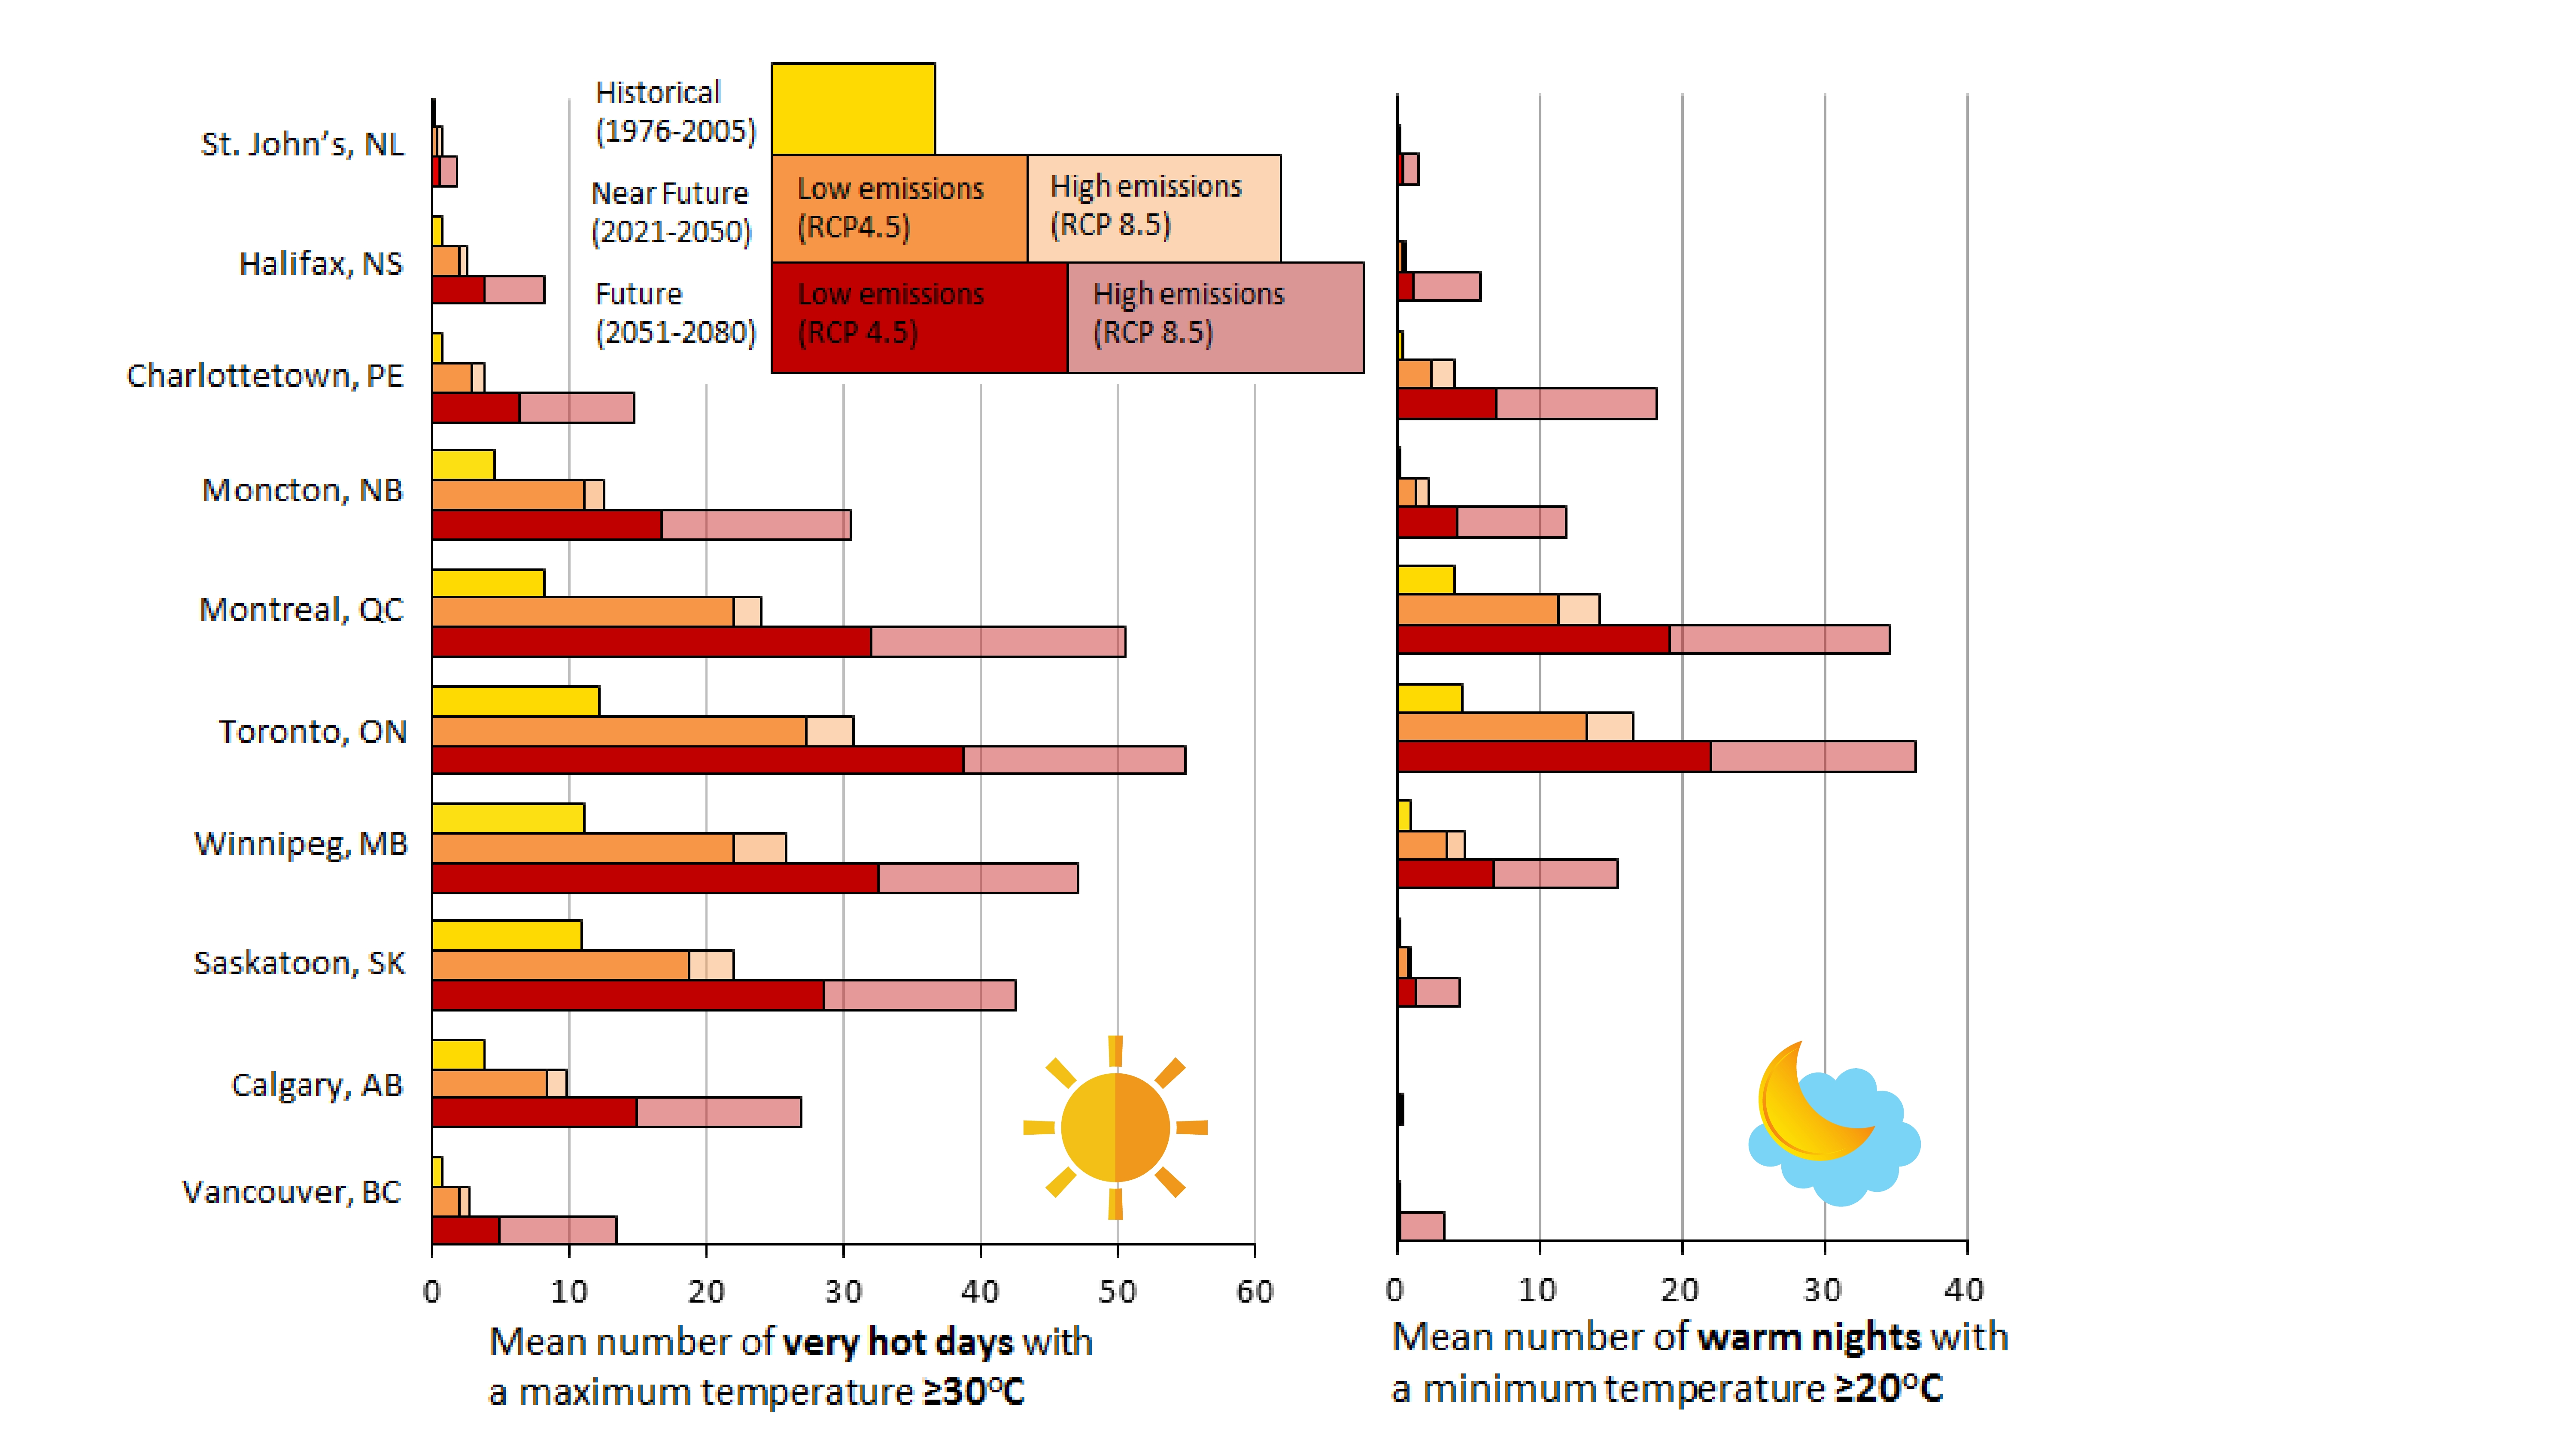 Comparison of past and projected number of very hot days and warm nights in Canadian cities. Text version below.